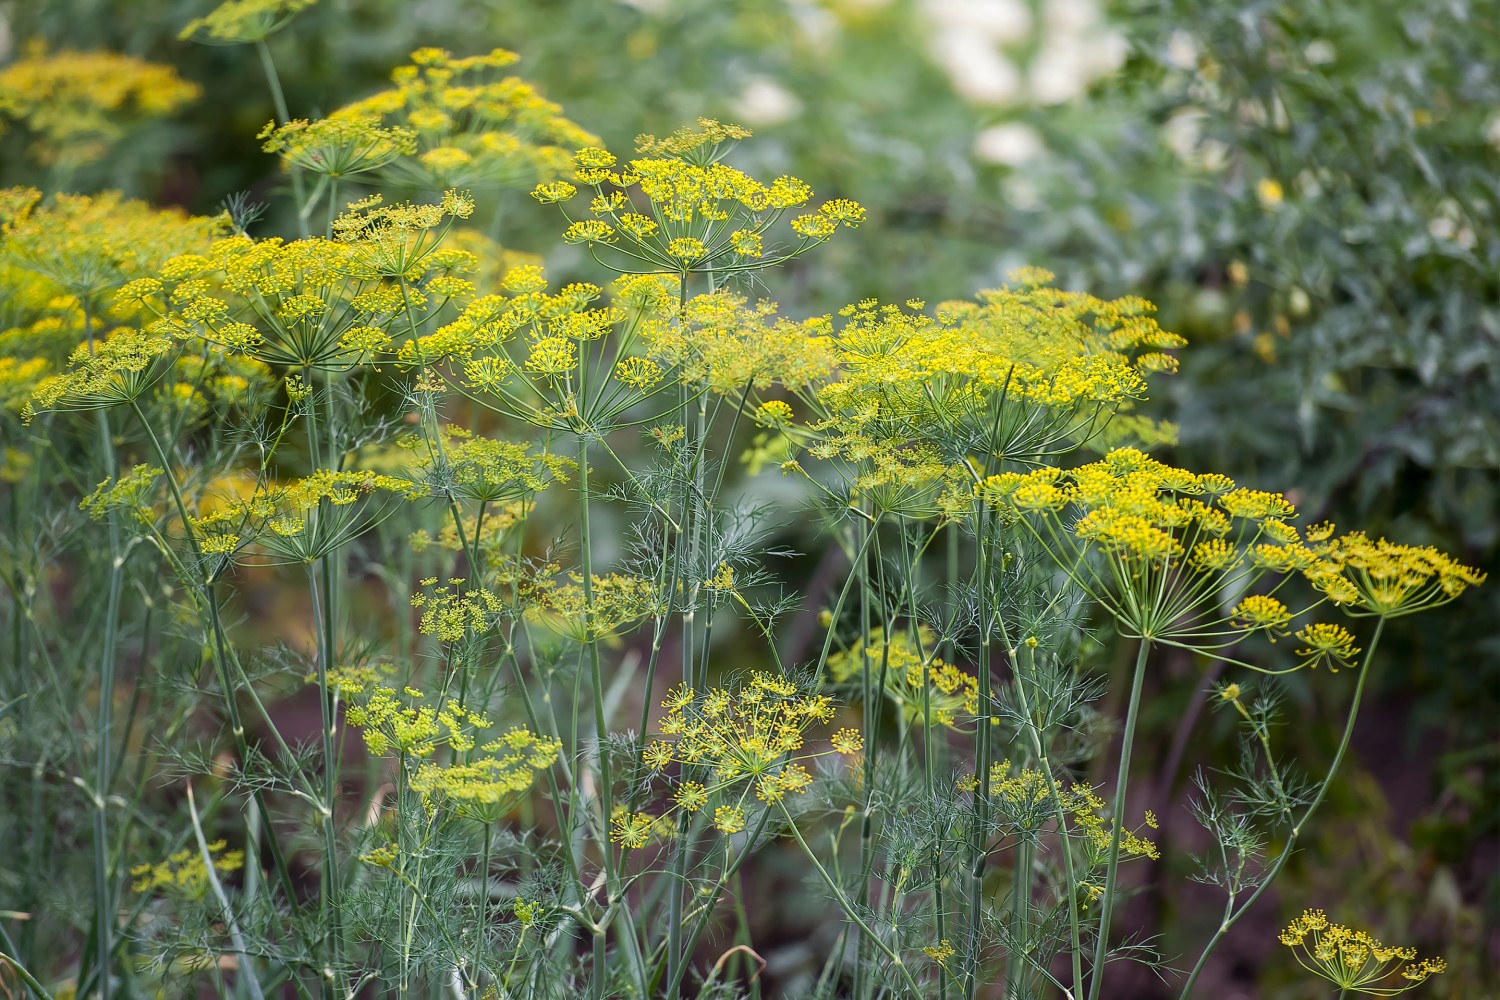 Wild Fennel with yellow flowers